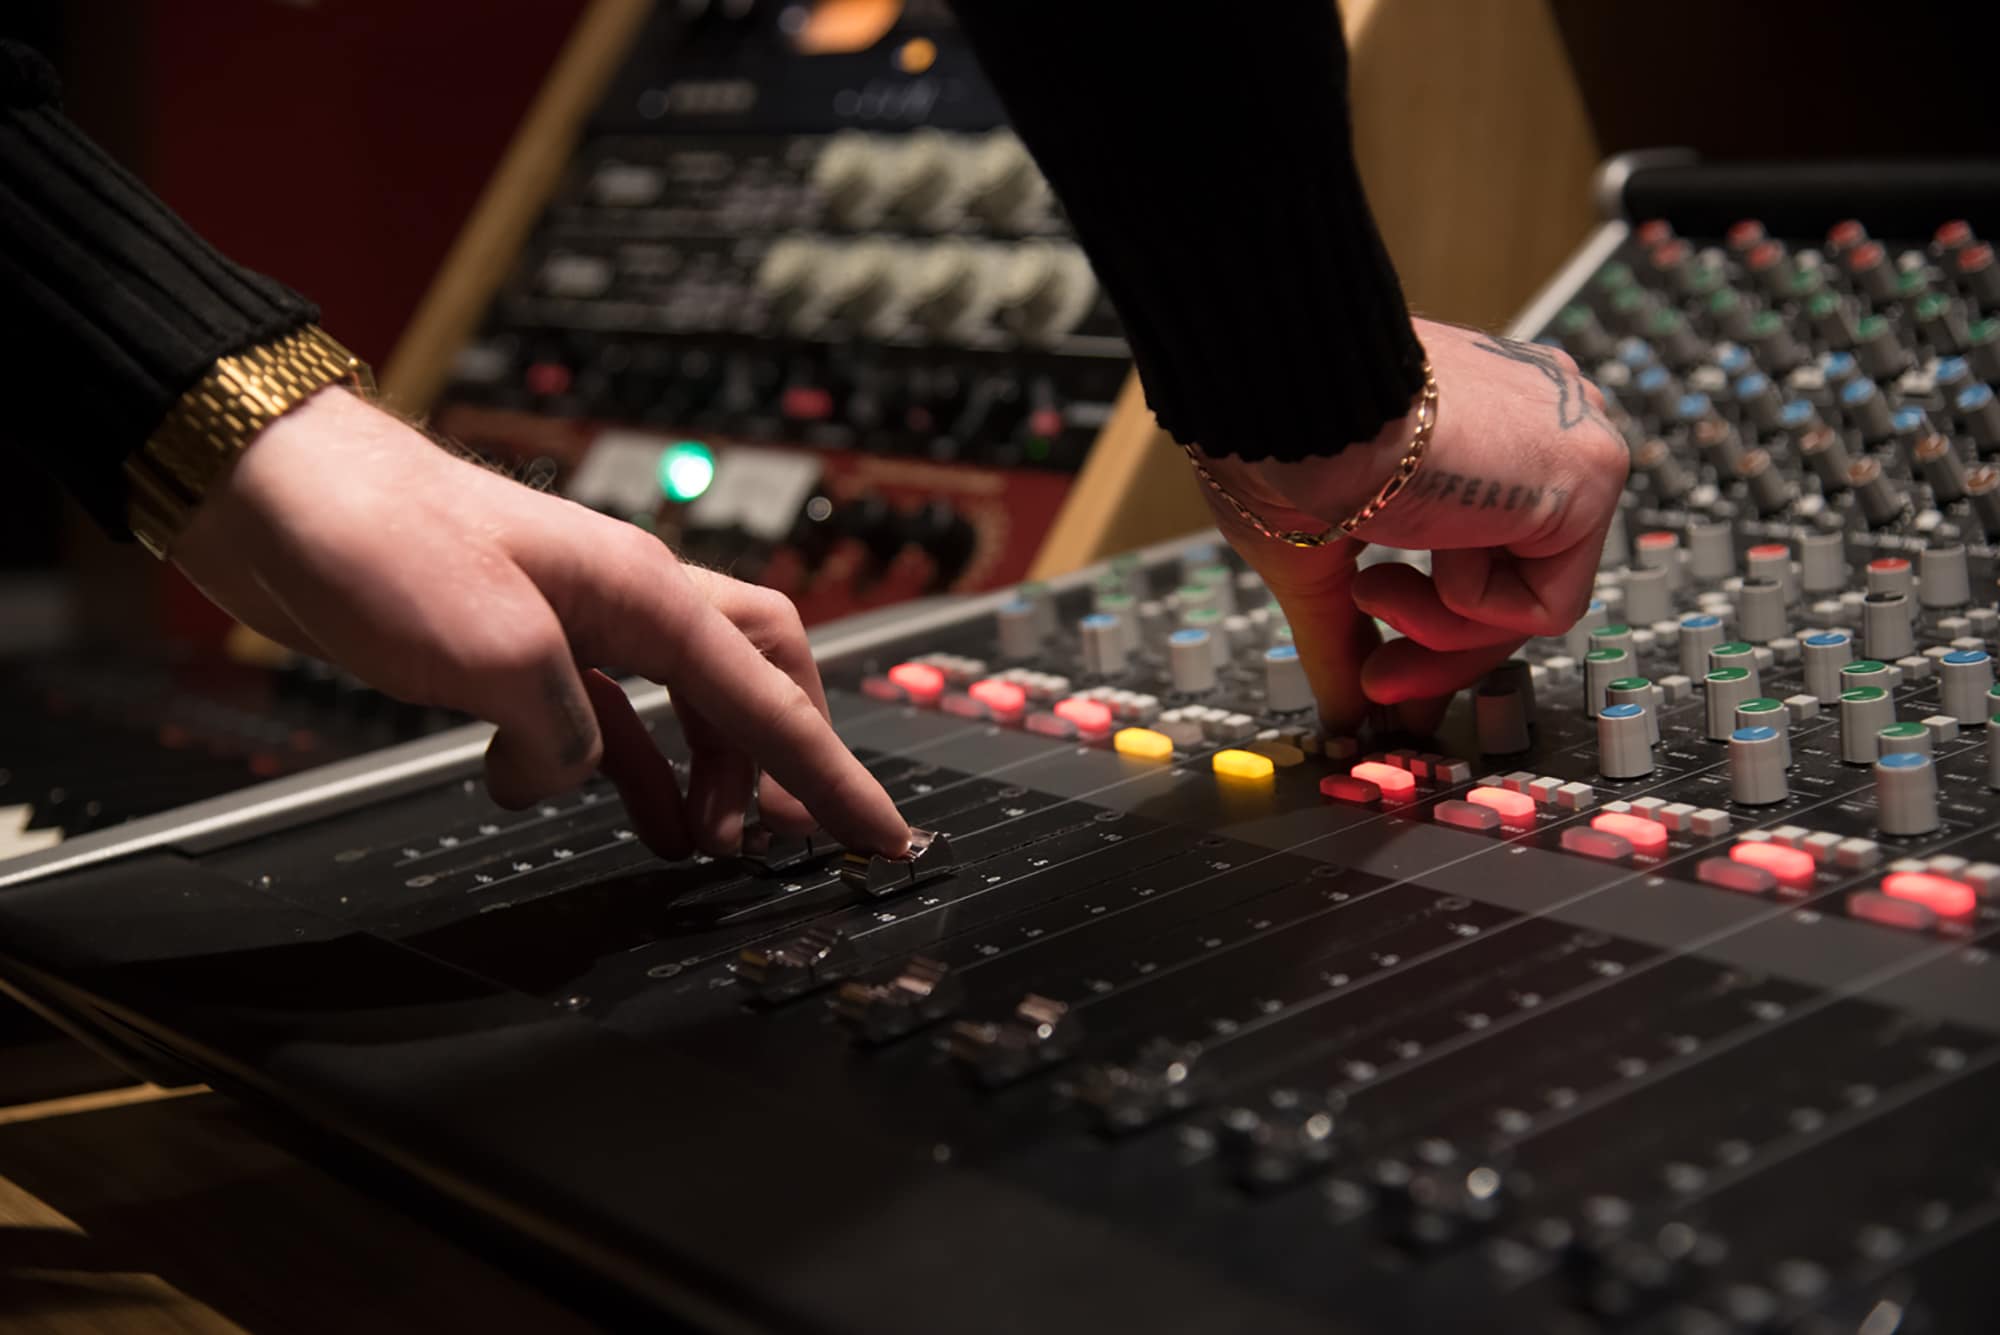 Student using the dials on a Music Production mixer